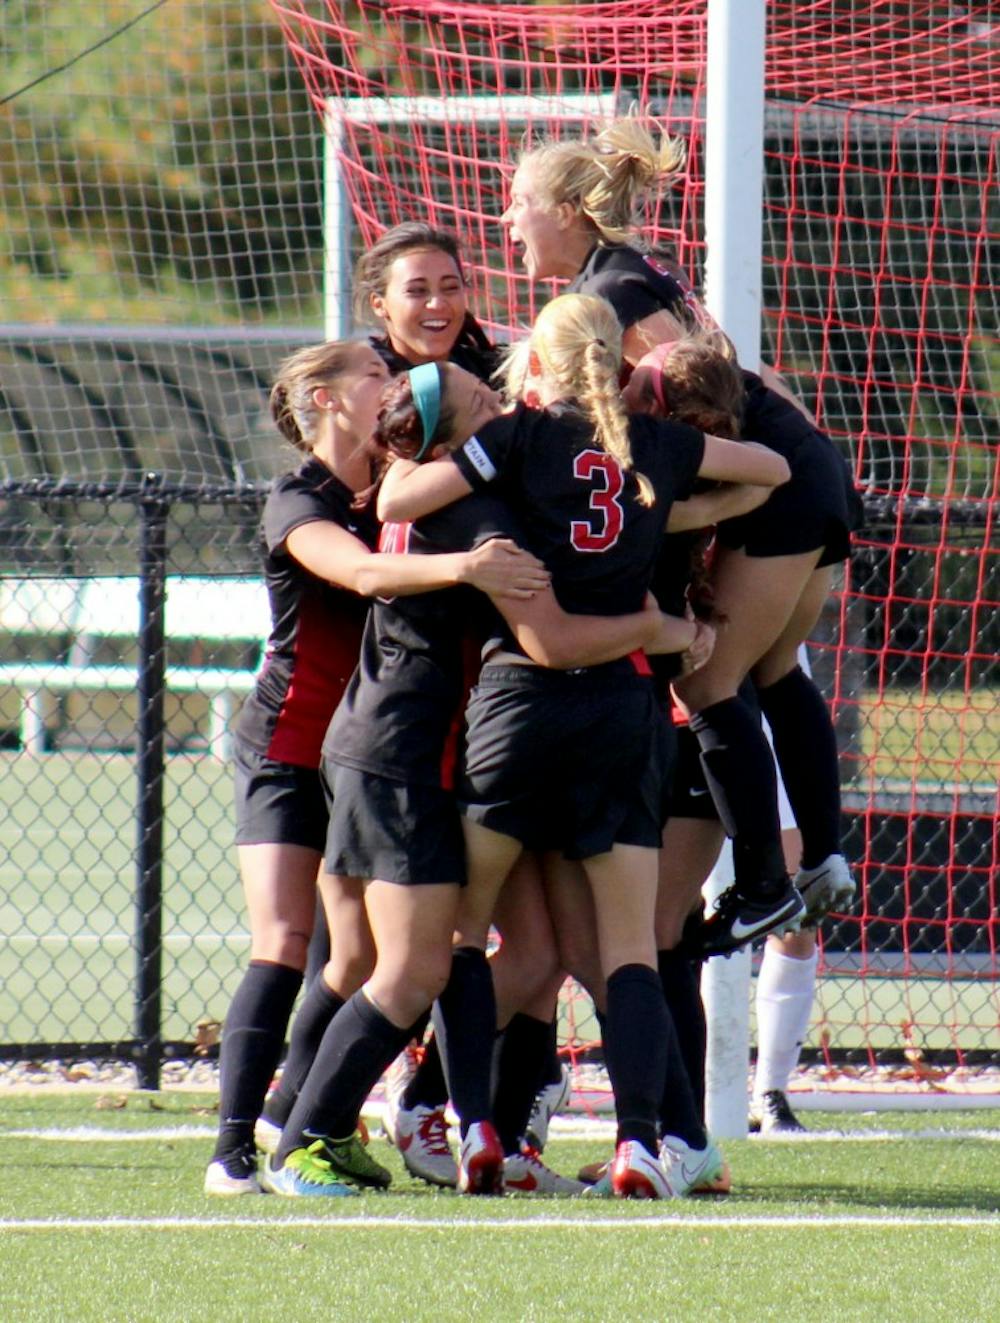 The Ball State Women's Soccer Team gathers for a group hug after winning in overtime in the match against Buffalo on Oct. 25 at the Briner Sports Complex. DN PHOTO ALLYE CLAYTON